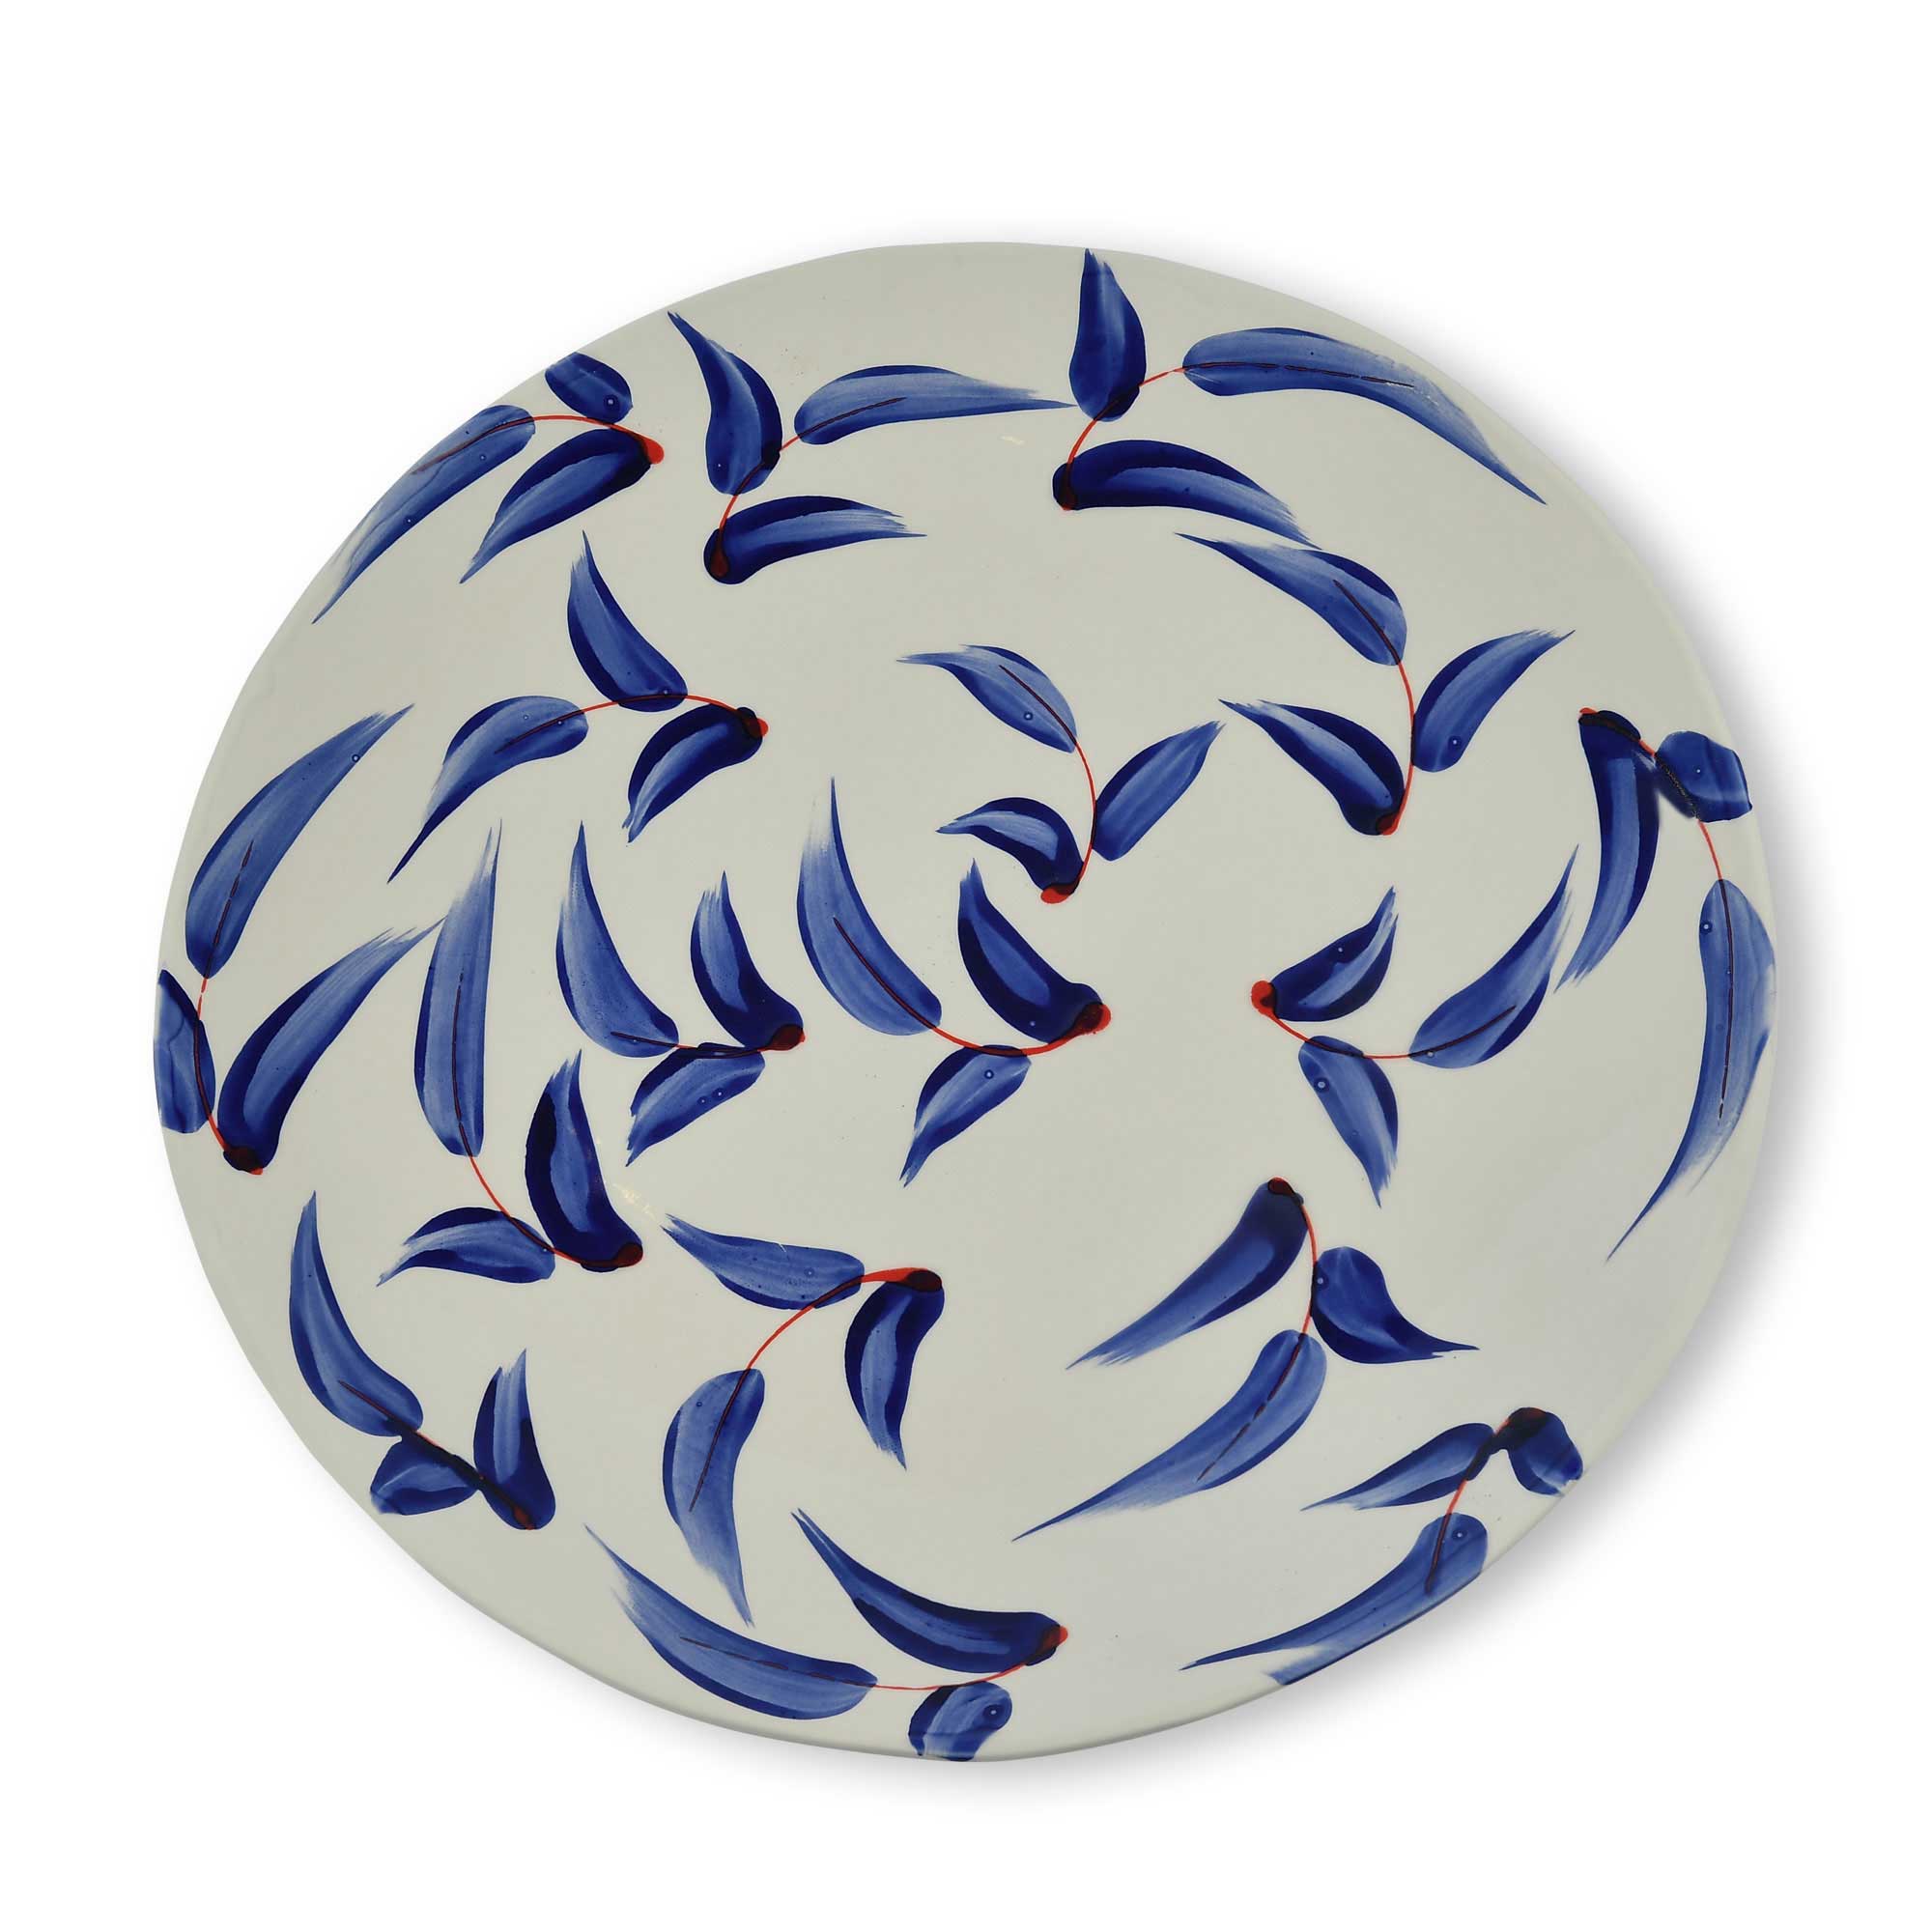 Ceramic%20Round%20Serving%20Plate%20With%20Three%20Leaves%20Motifs image 1